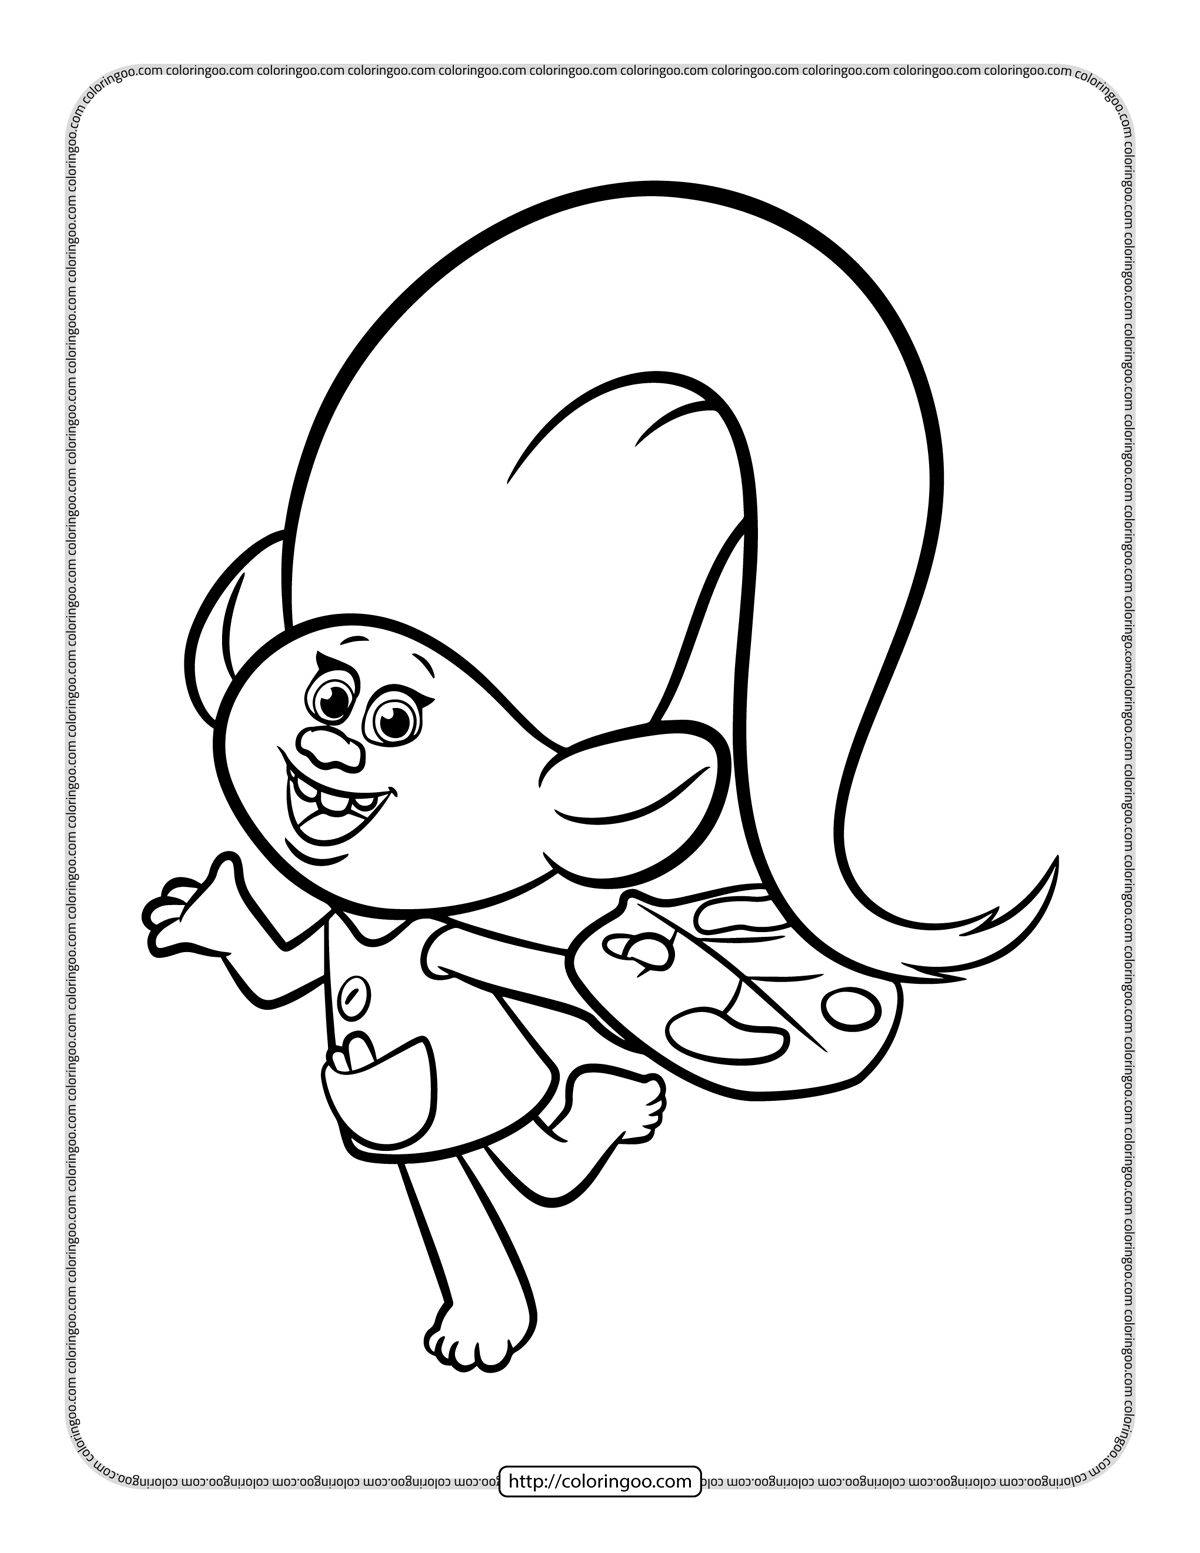 funko pop troll coloring pages